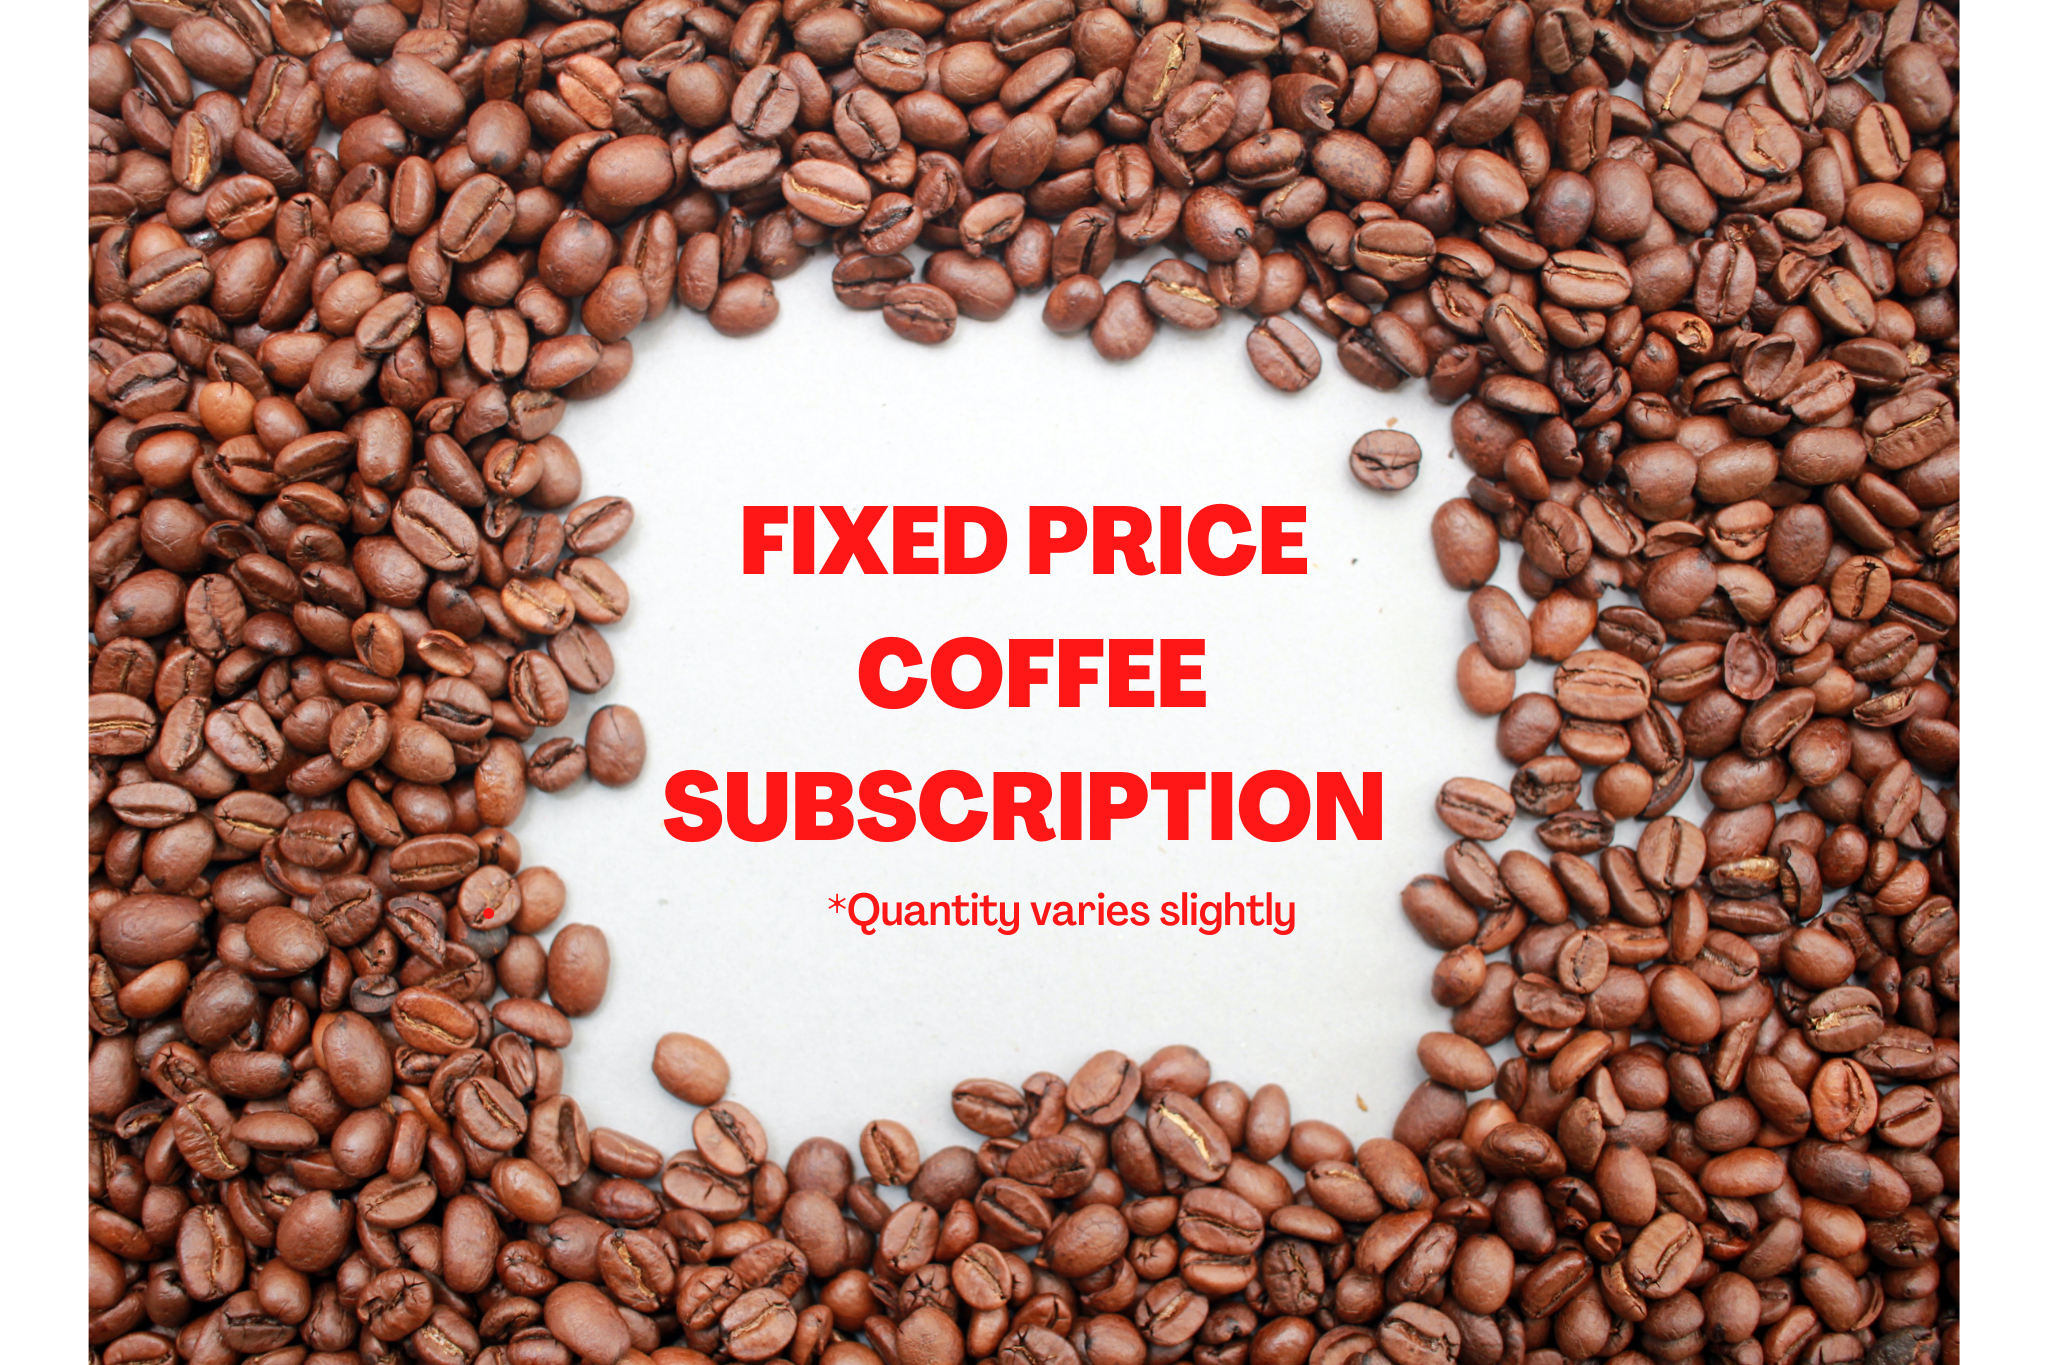 FIXED PRICE COFFEE SUBSCRIPTION